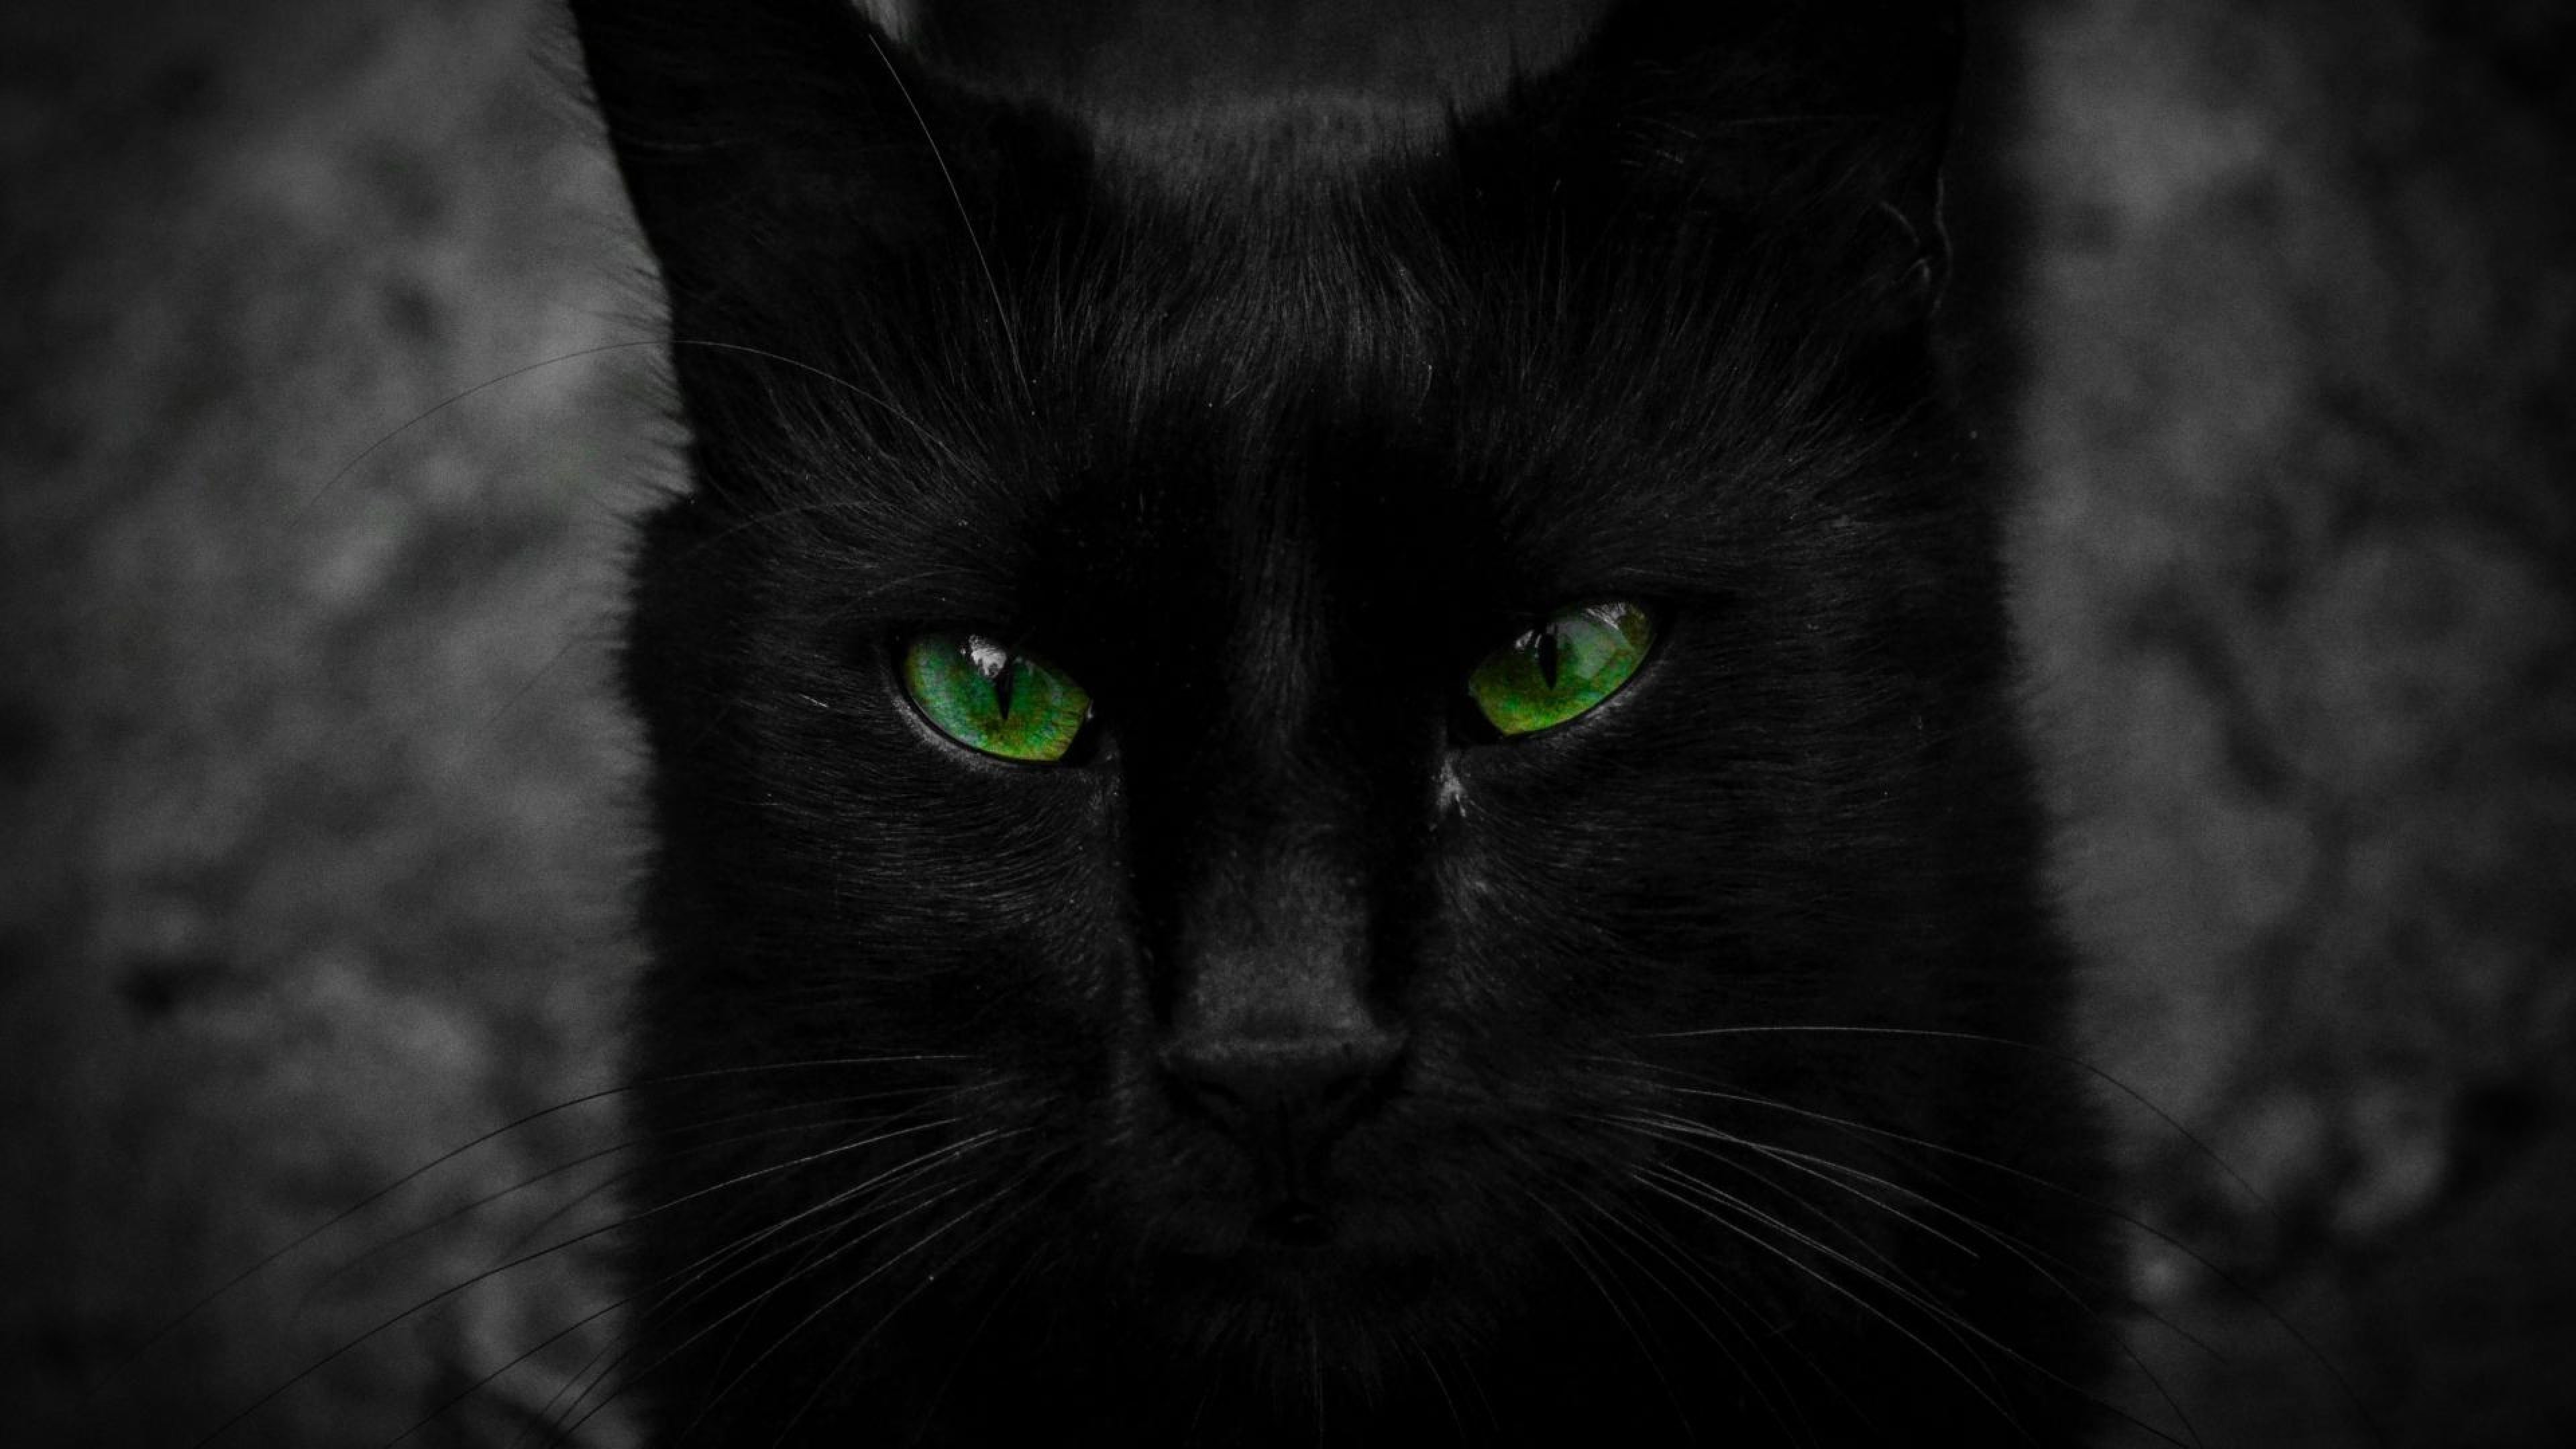 cat eyes wallpaper,cat,black cat,black,whiskers,small to medium sized cats